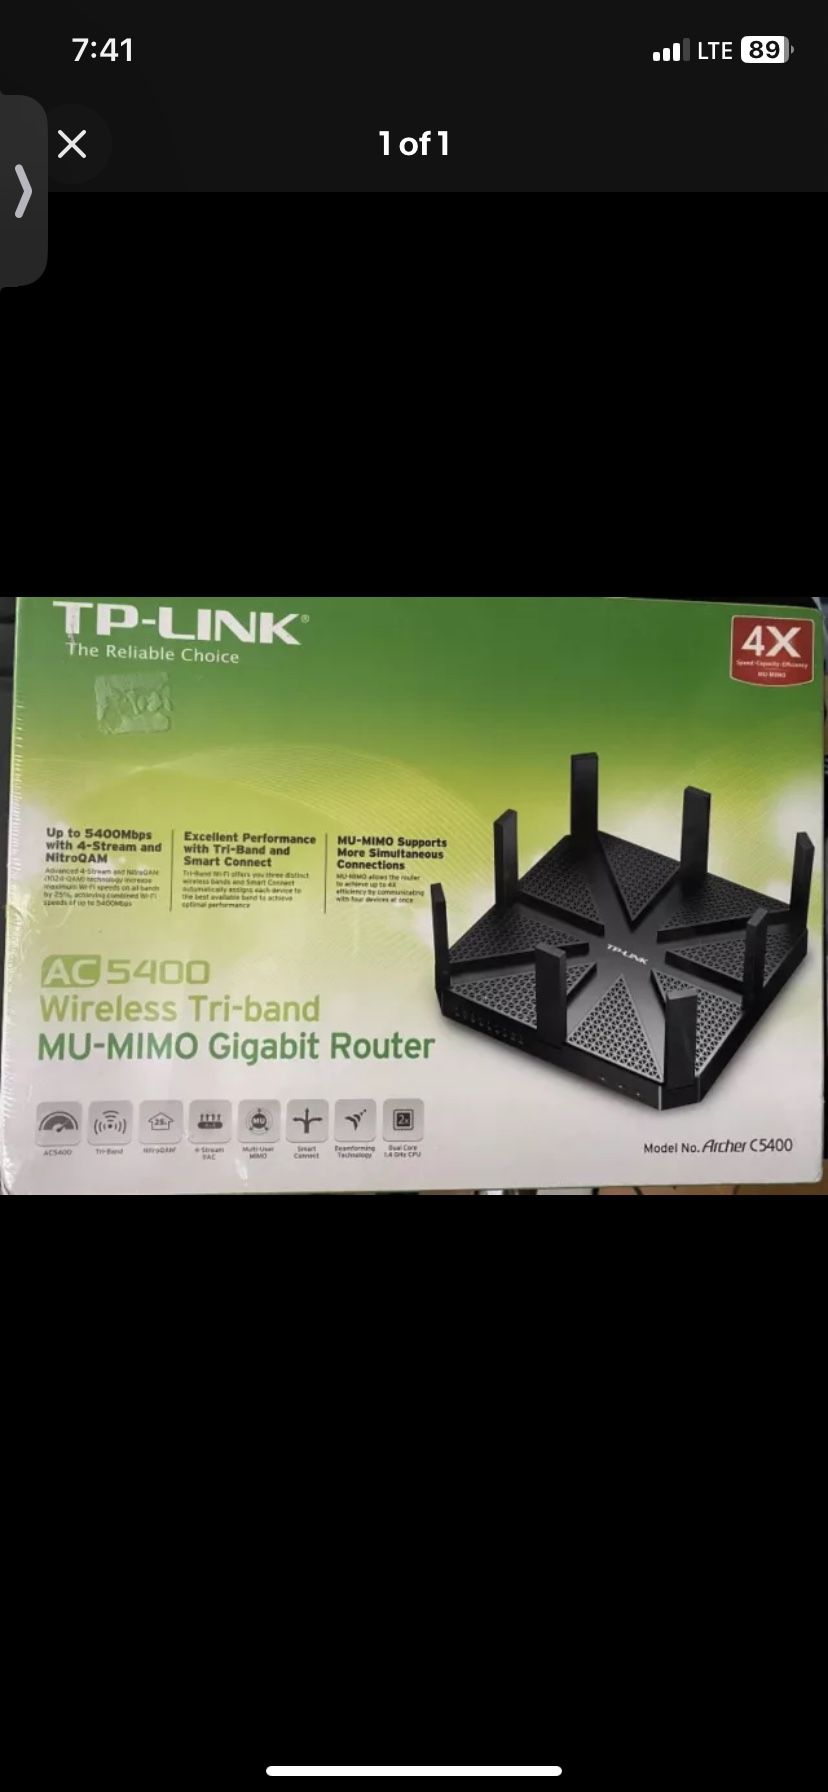 TP-Link Archer C5400 MU-MIMO High Capacity Home WiFi Router Open box